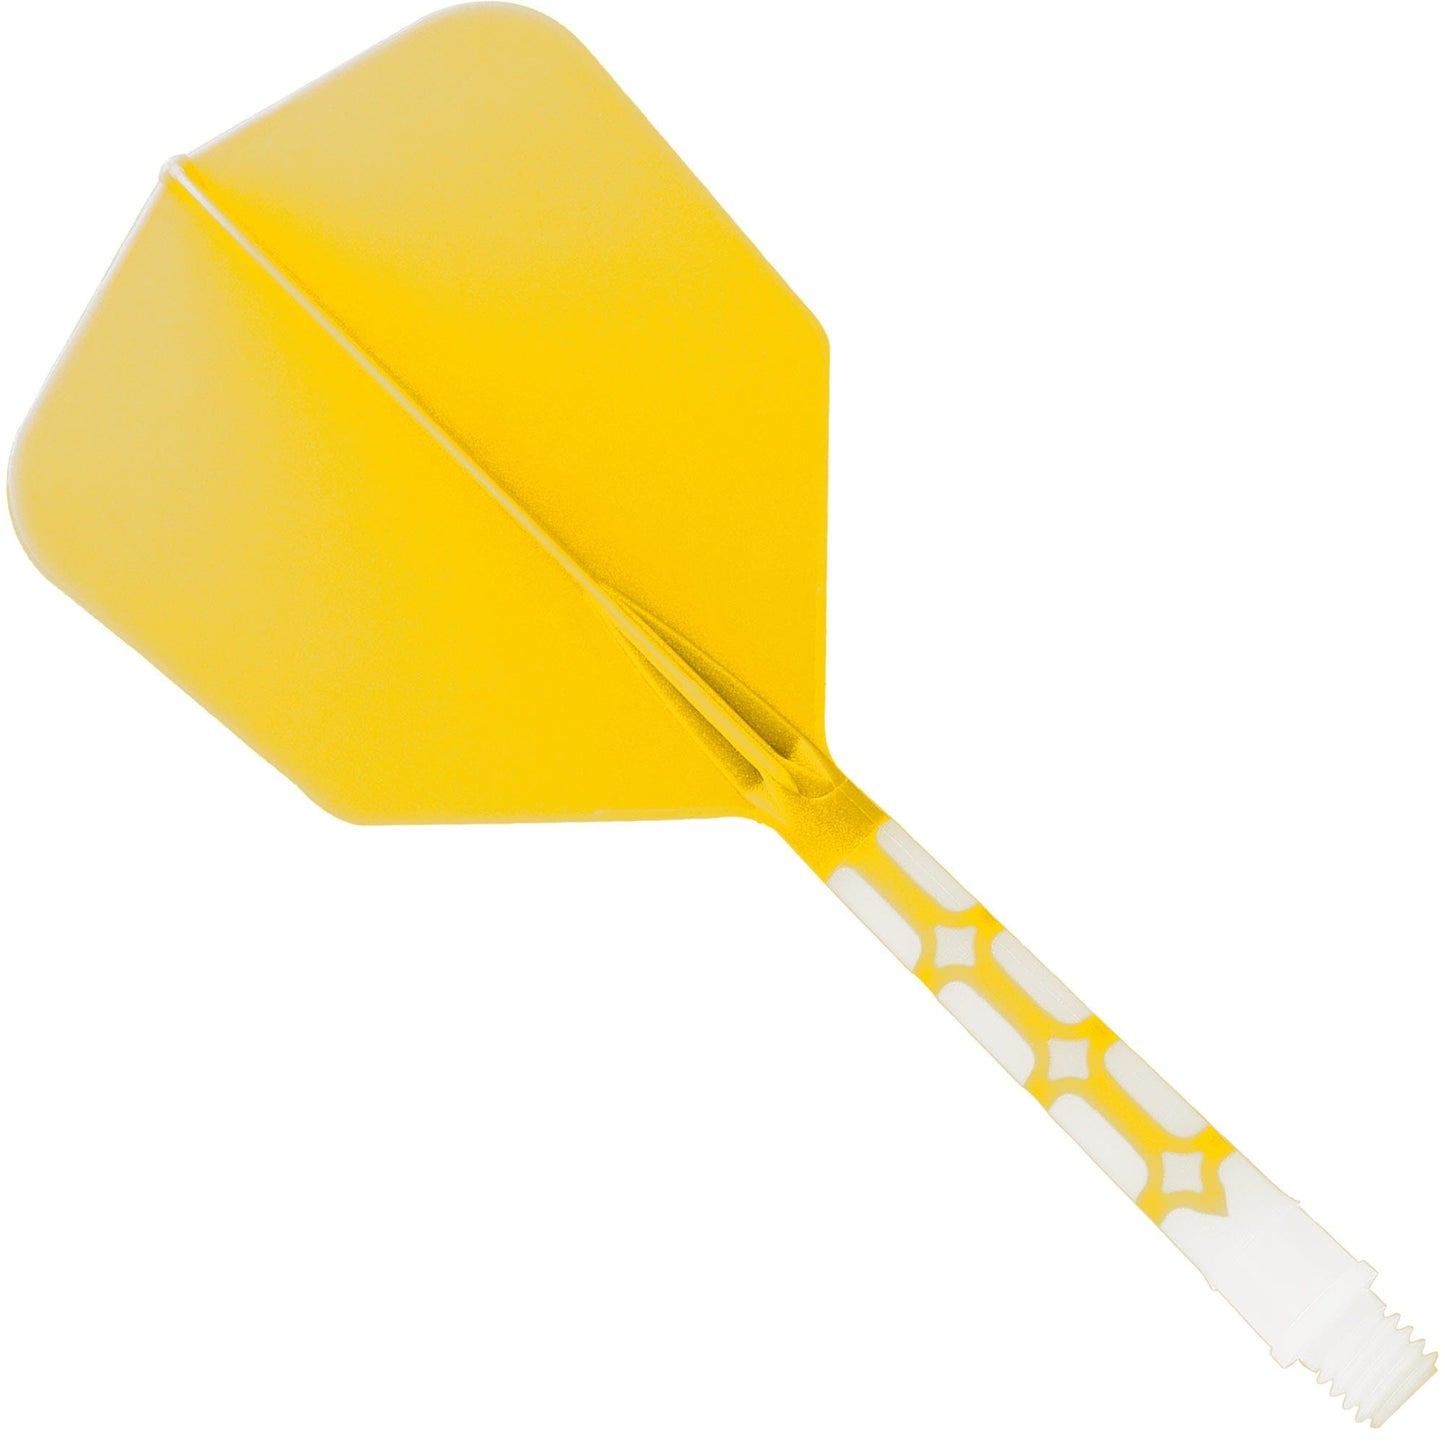 Cuesoul Rost T19 Integrated Dart Shaft and Flights - Big Wing - White with Yellow Flight Long